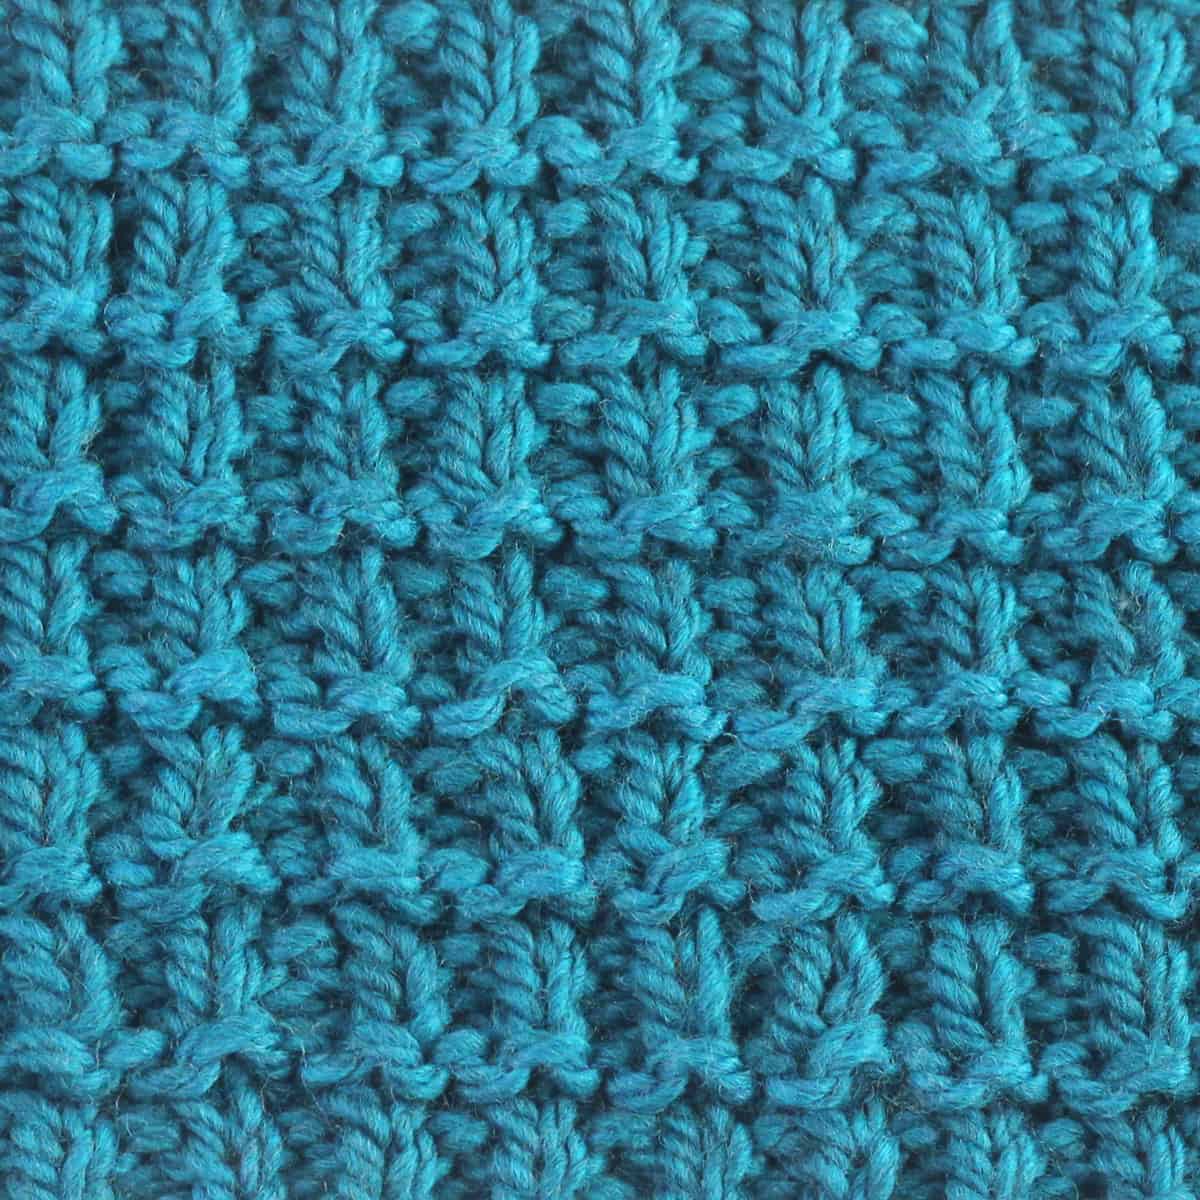 Hurdle stitch texture knitted with blue colored yarn.